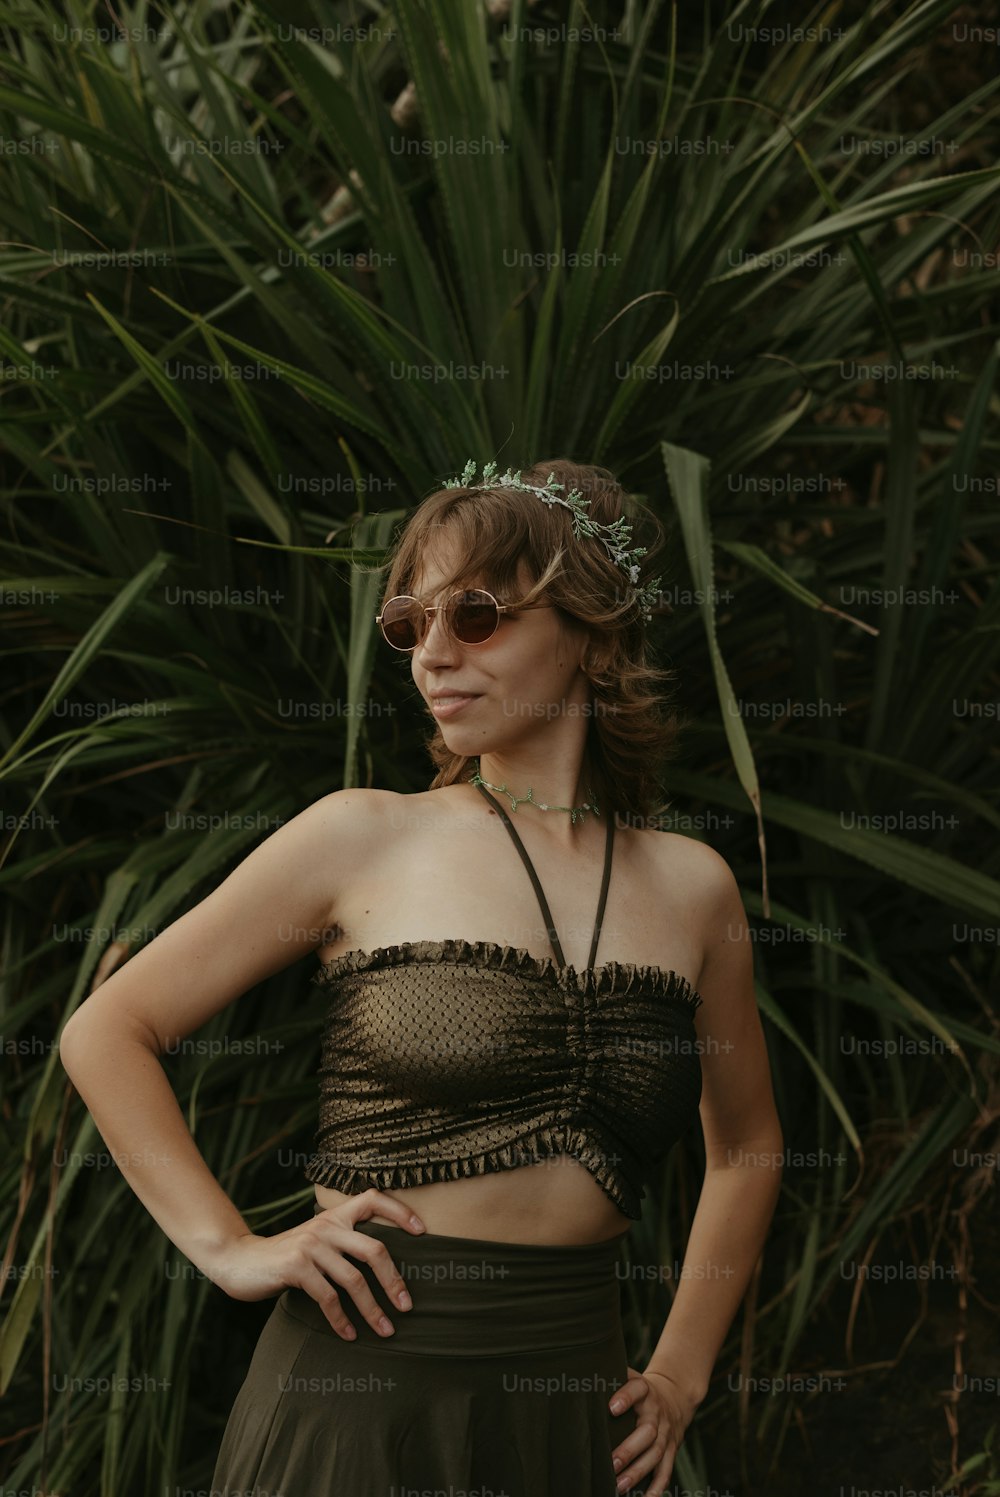 a woman standing in front of a bush wearing sunglasses